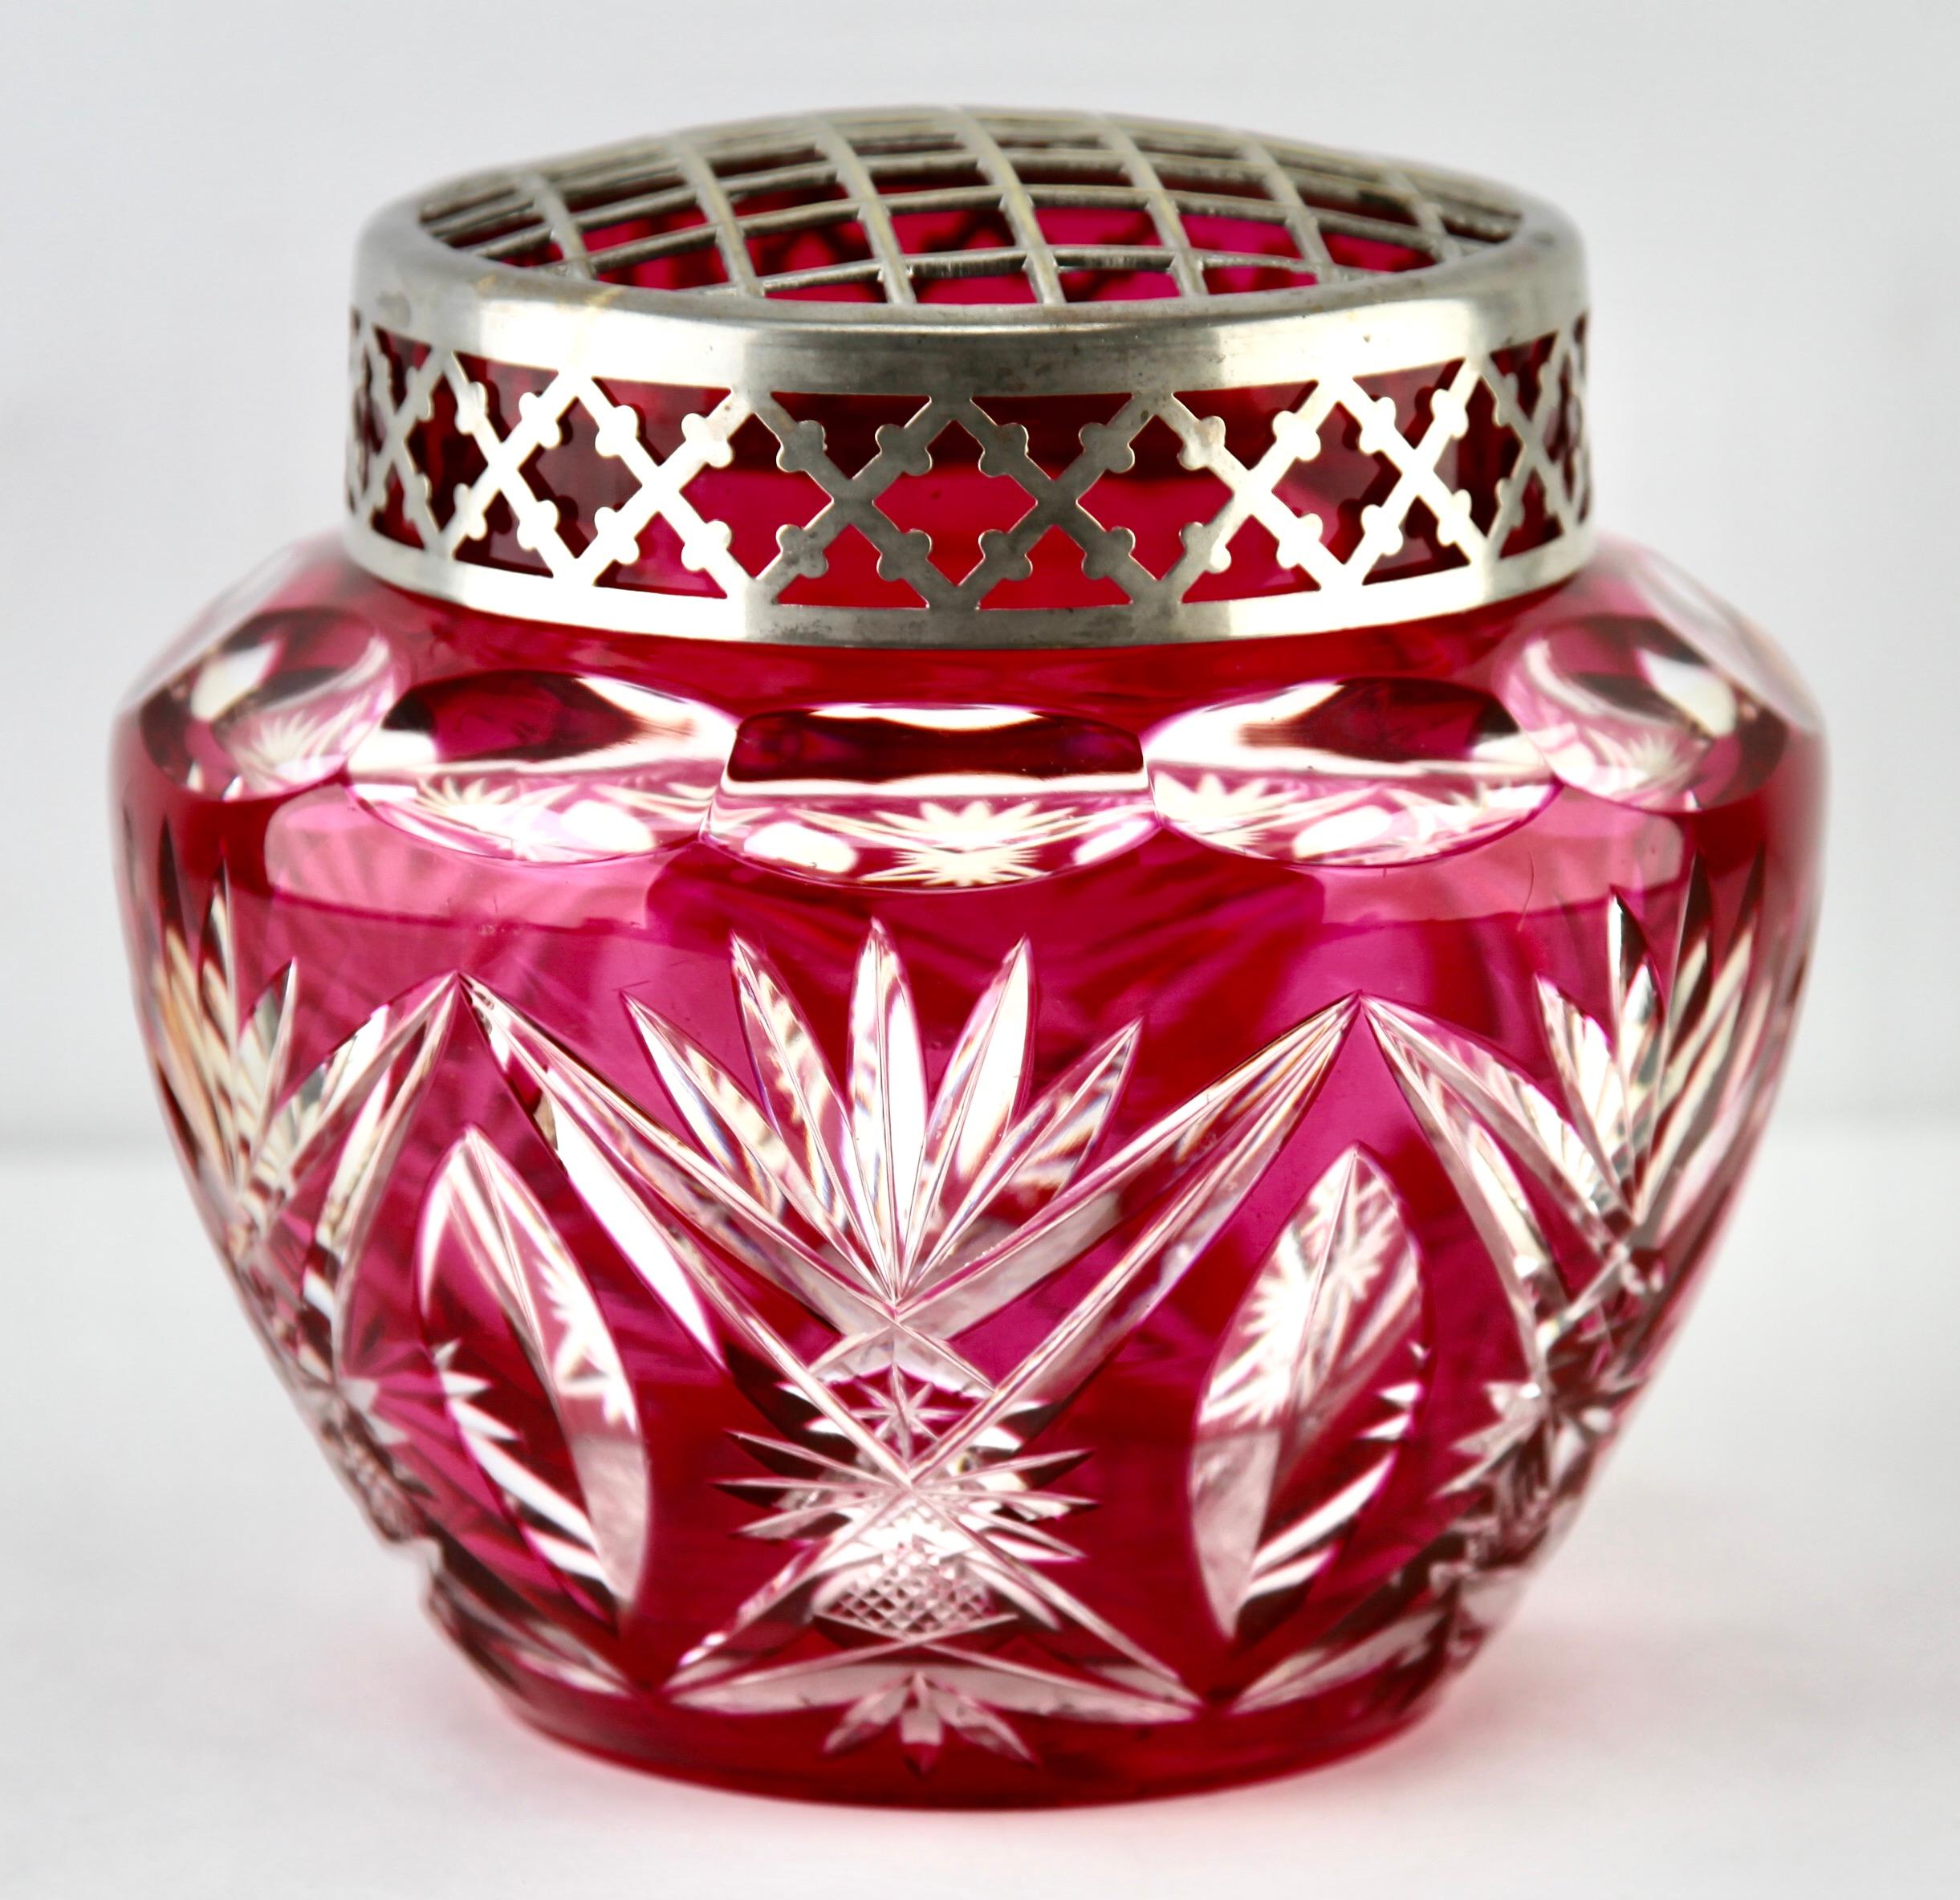 Vibrant, cased-crystal glass 'Pique Fleurs' vase with a cut-to-clear Art Deco decoration 
This design for vases is often called 'Pique fleurs' or 'rose-bowl' and is supplied with a fitted crystal grille to support stems in an arrangement. The body